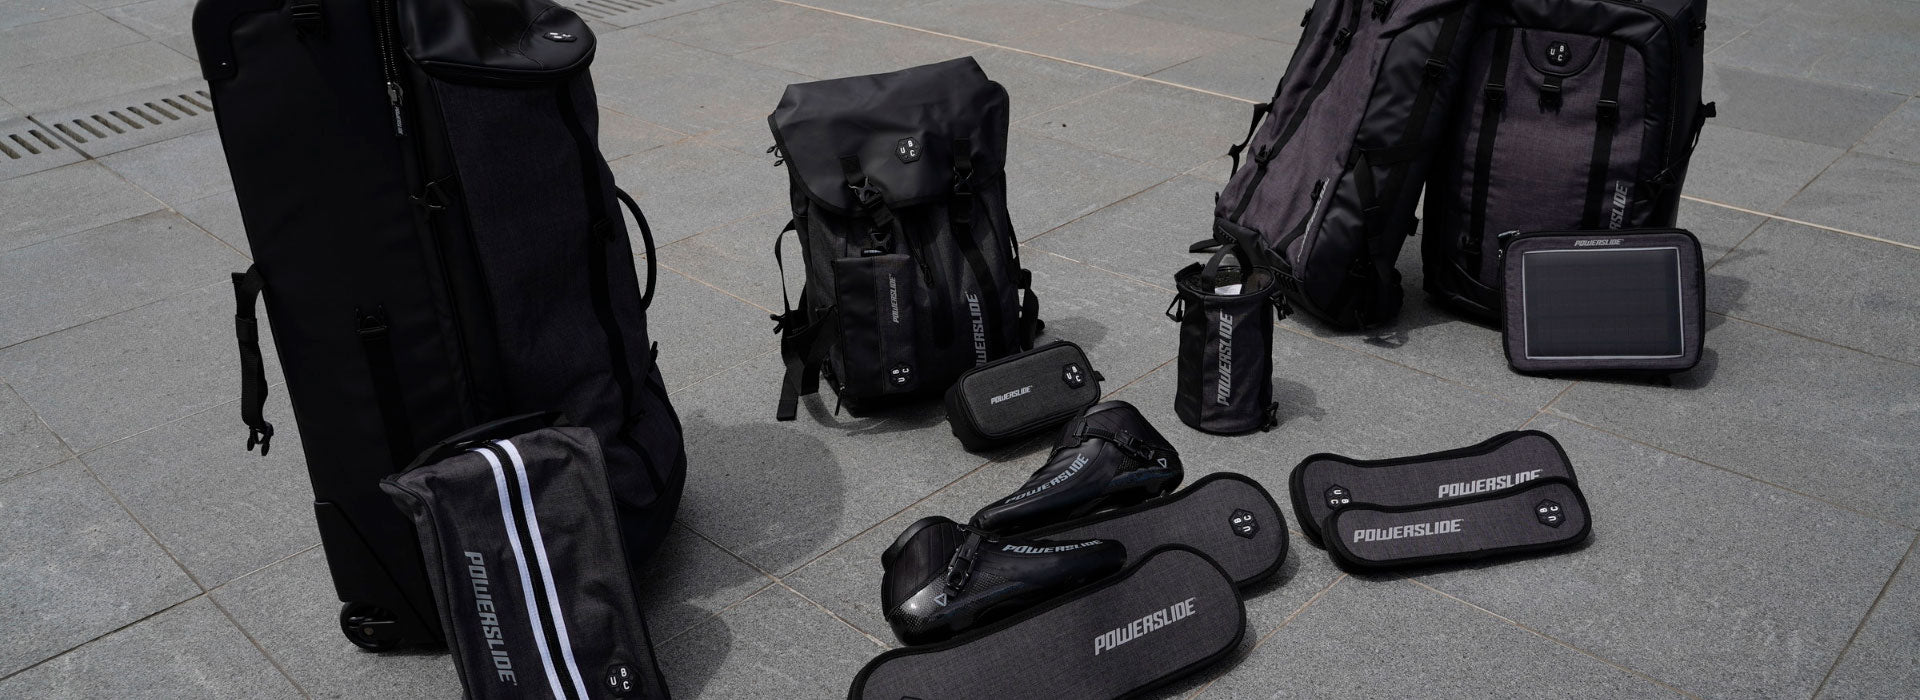 A range of different sized bags, backpacks and accessories site on the ground